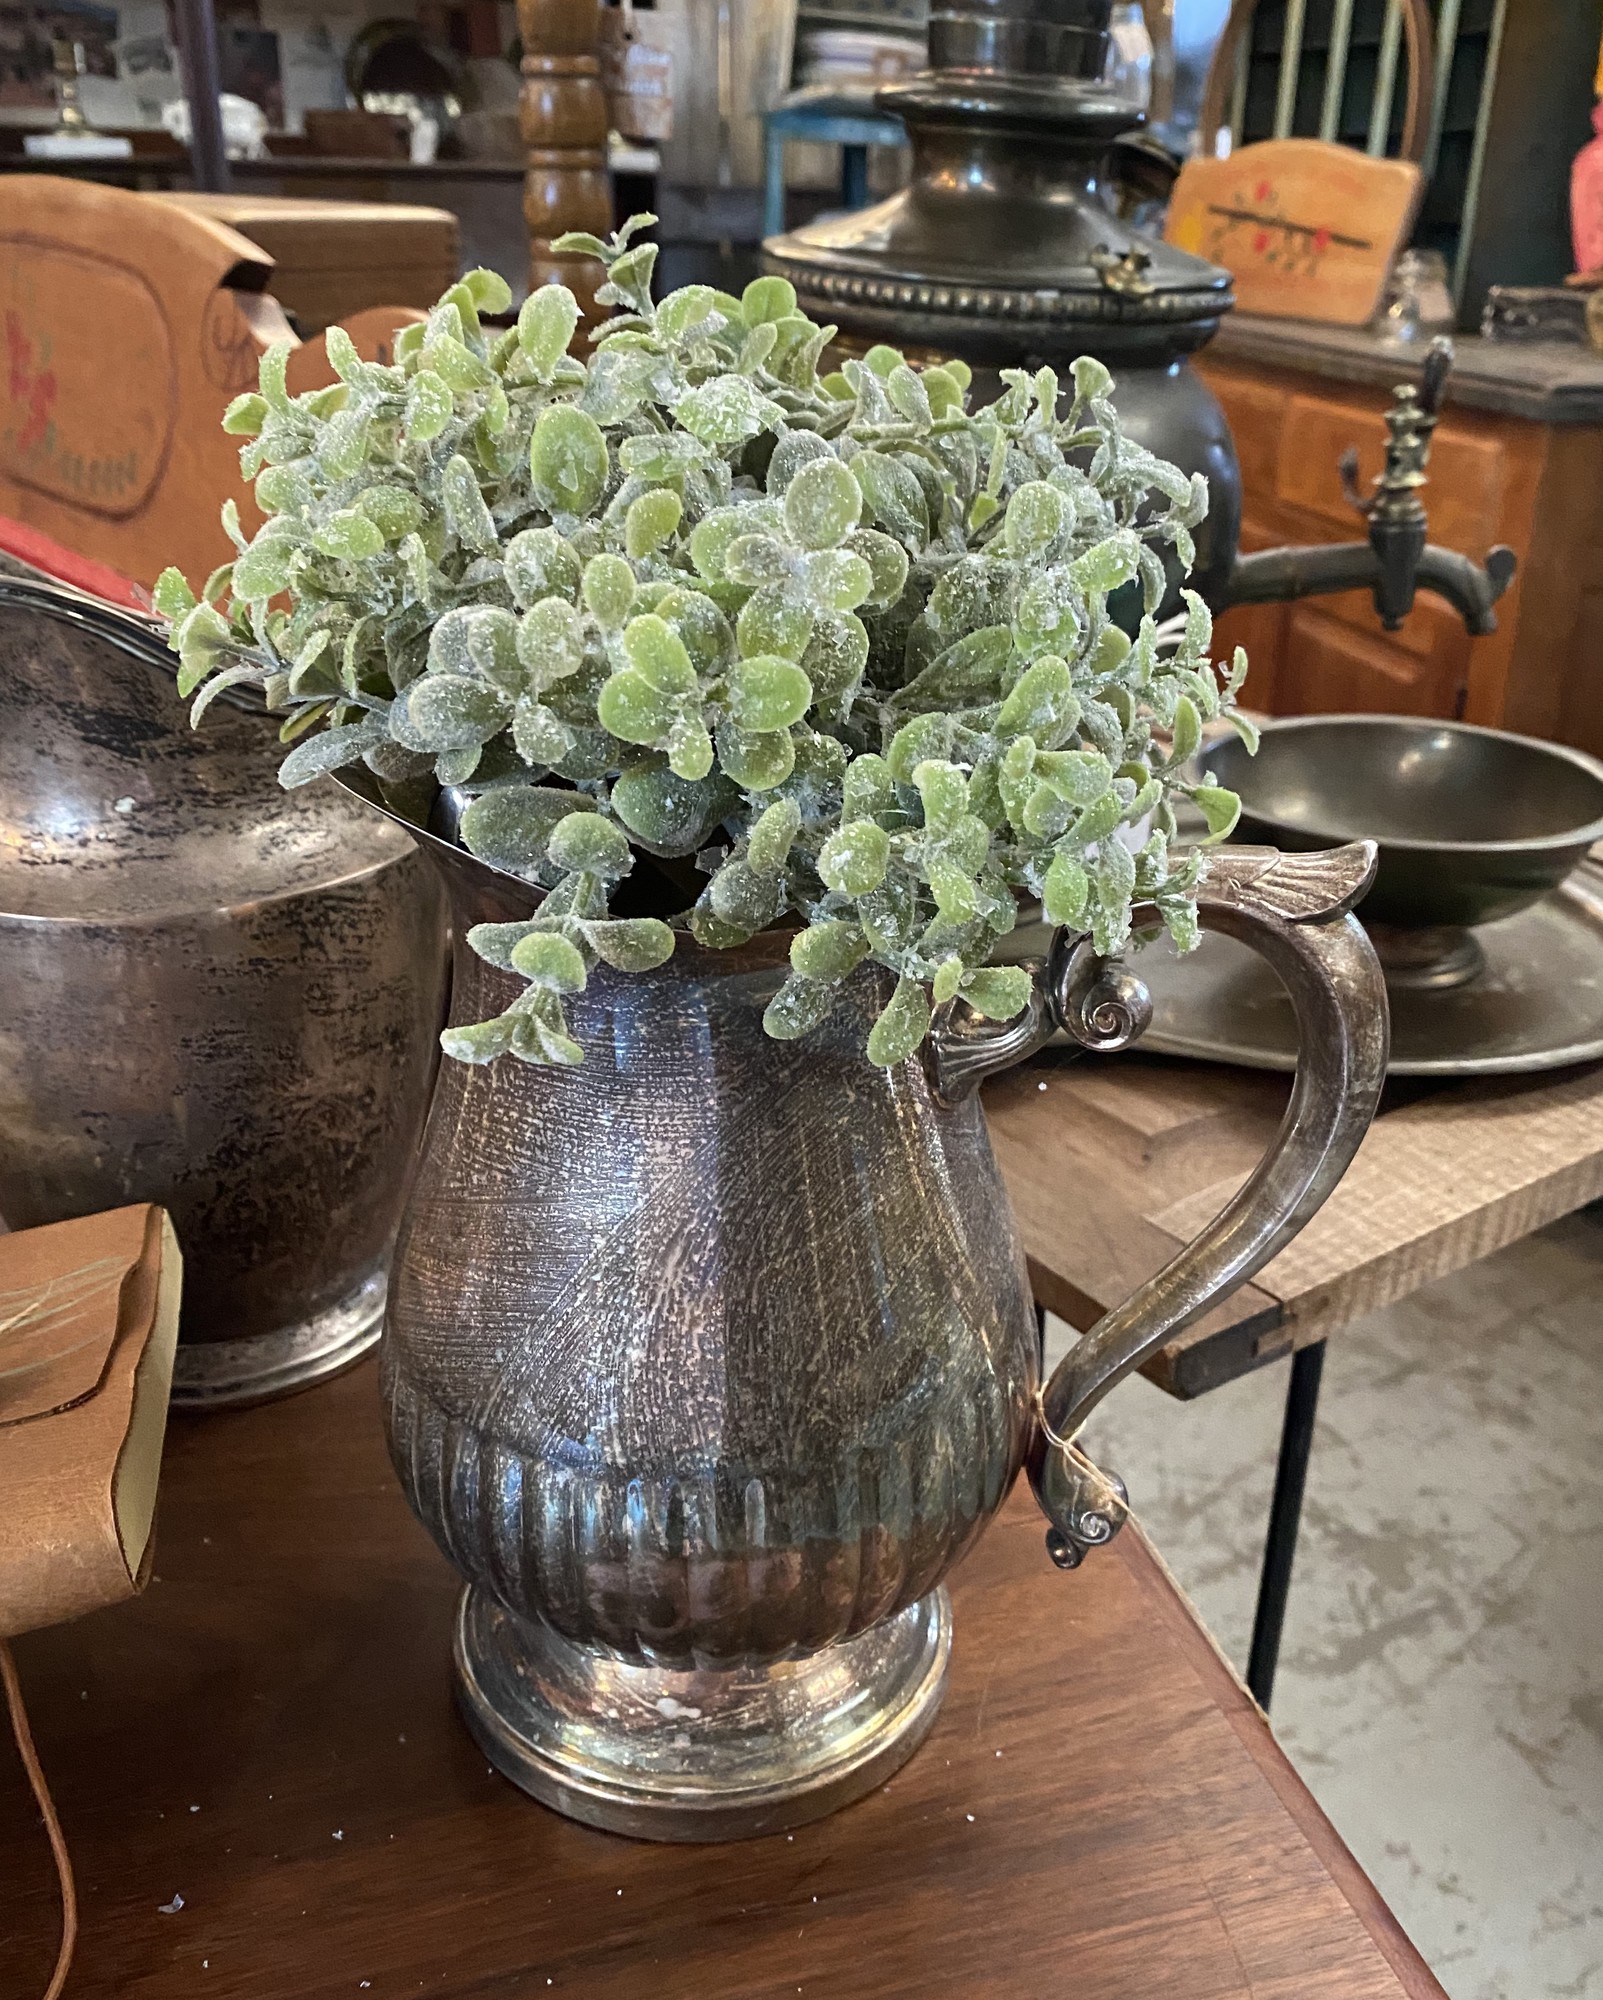 How beautiful are these icy eucalyptus half spheres? The icy look on these leaves makes this floral stand out no matter where you place it, whether it be on a candle holder, in a vase, or simply on its own!